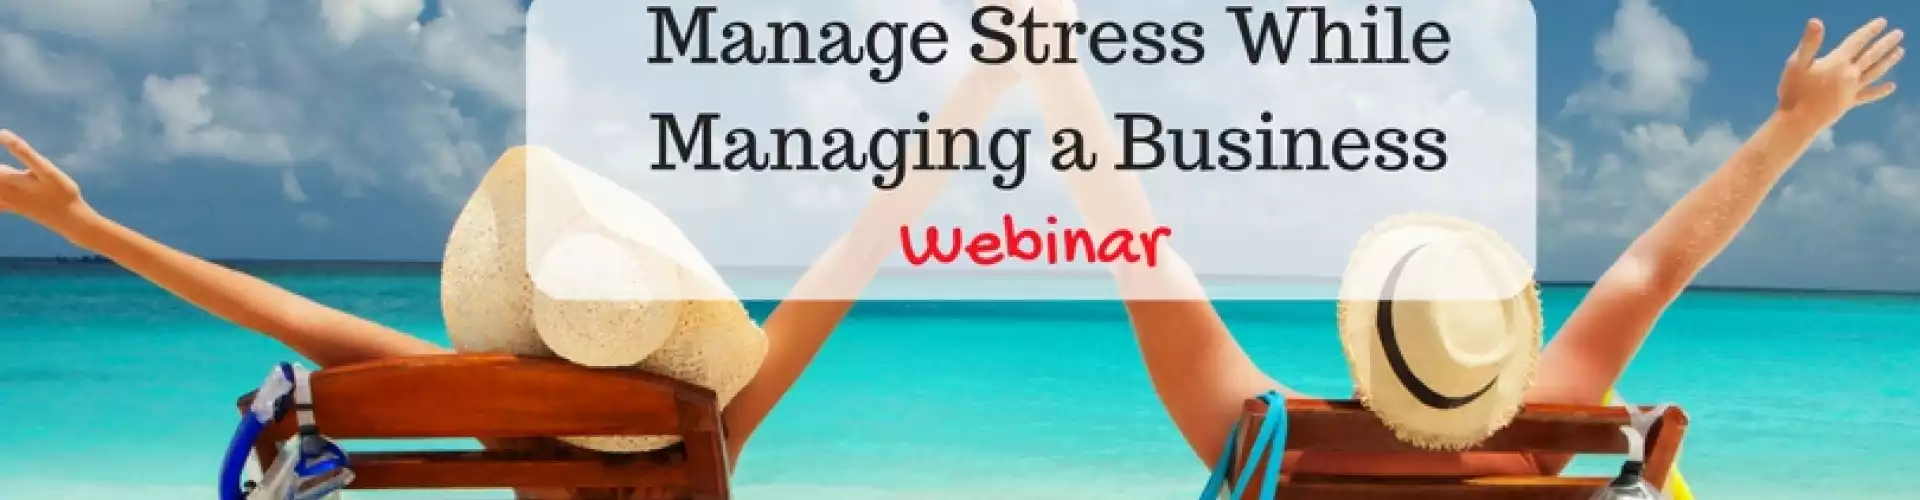 Manage Stress While Managing a Business - FREE Webinar